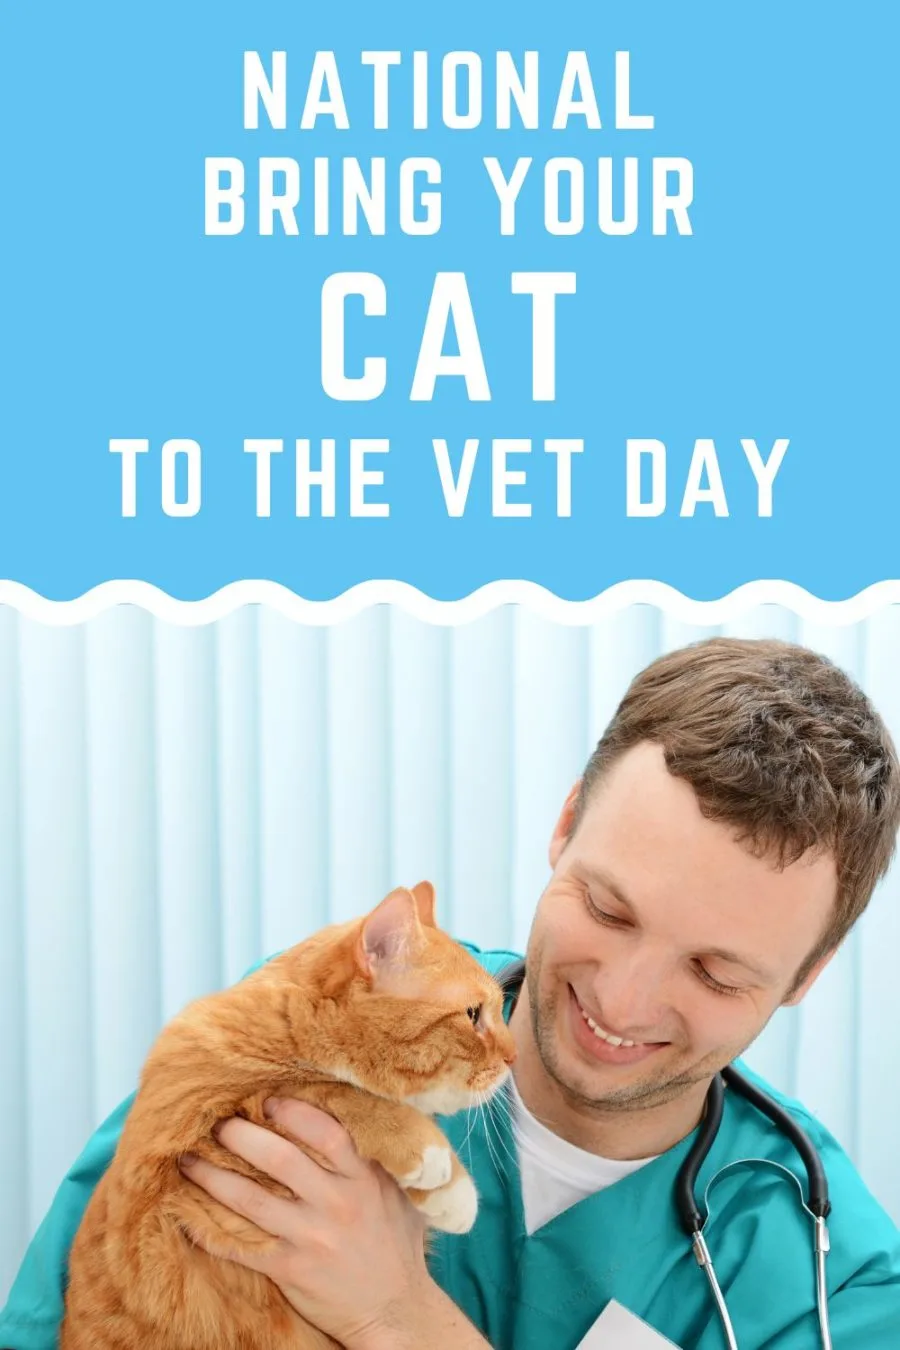 National Bring Your Cat to the Vet Day